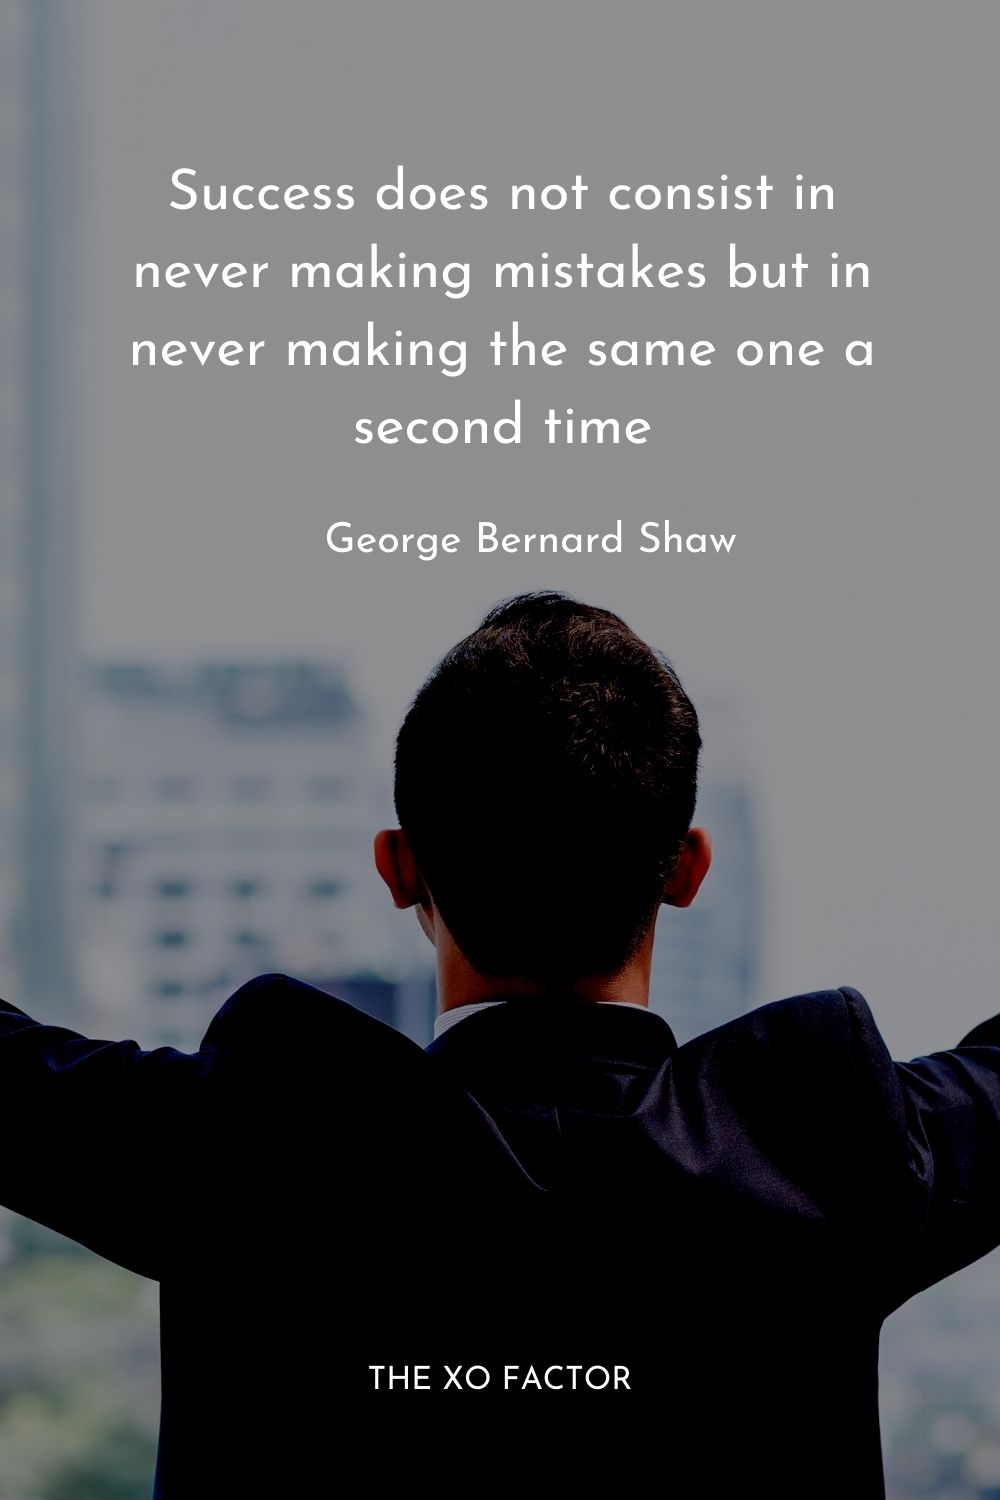 Success does not consist in never making mistakes but in never making the same one a second time. George Bernard Shaw